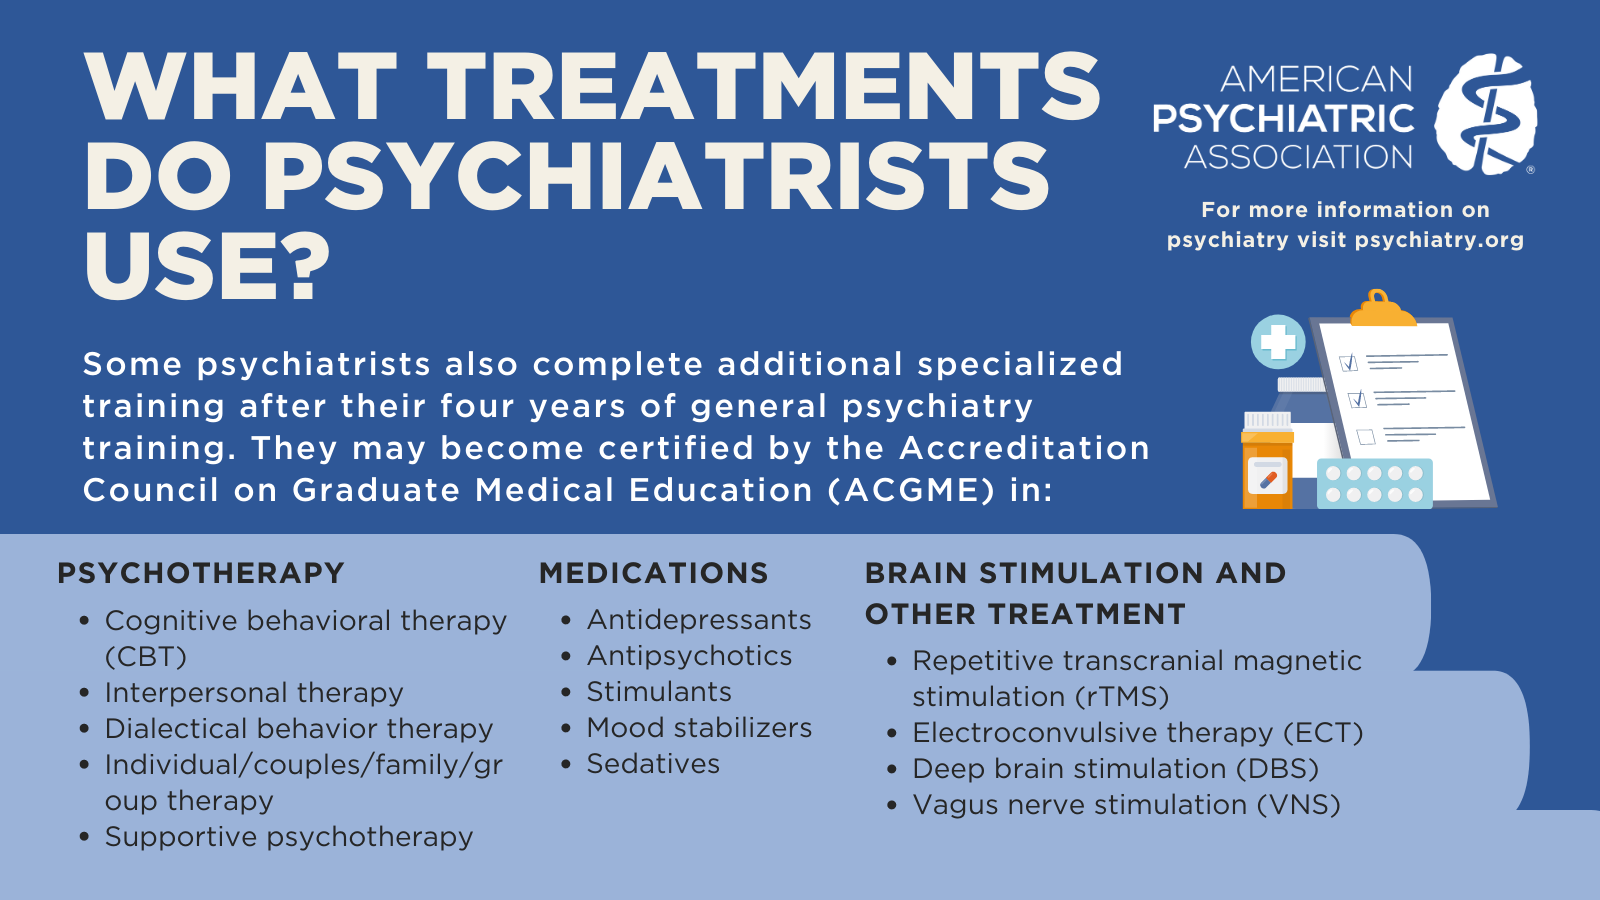 What treatments do psychiatrists use?